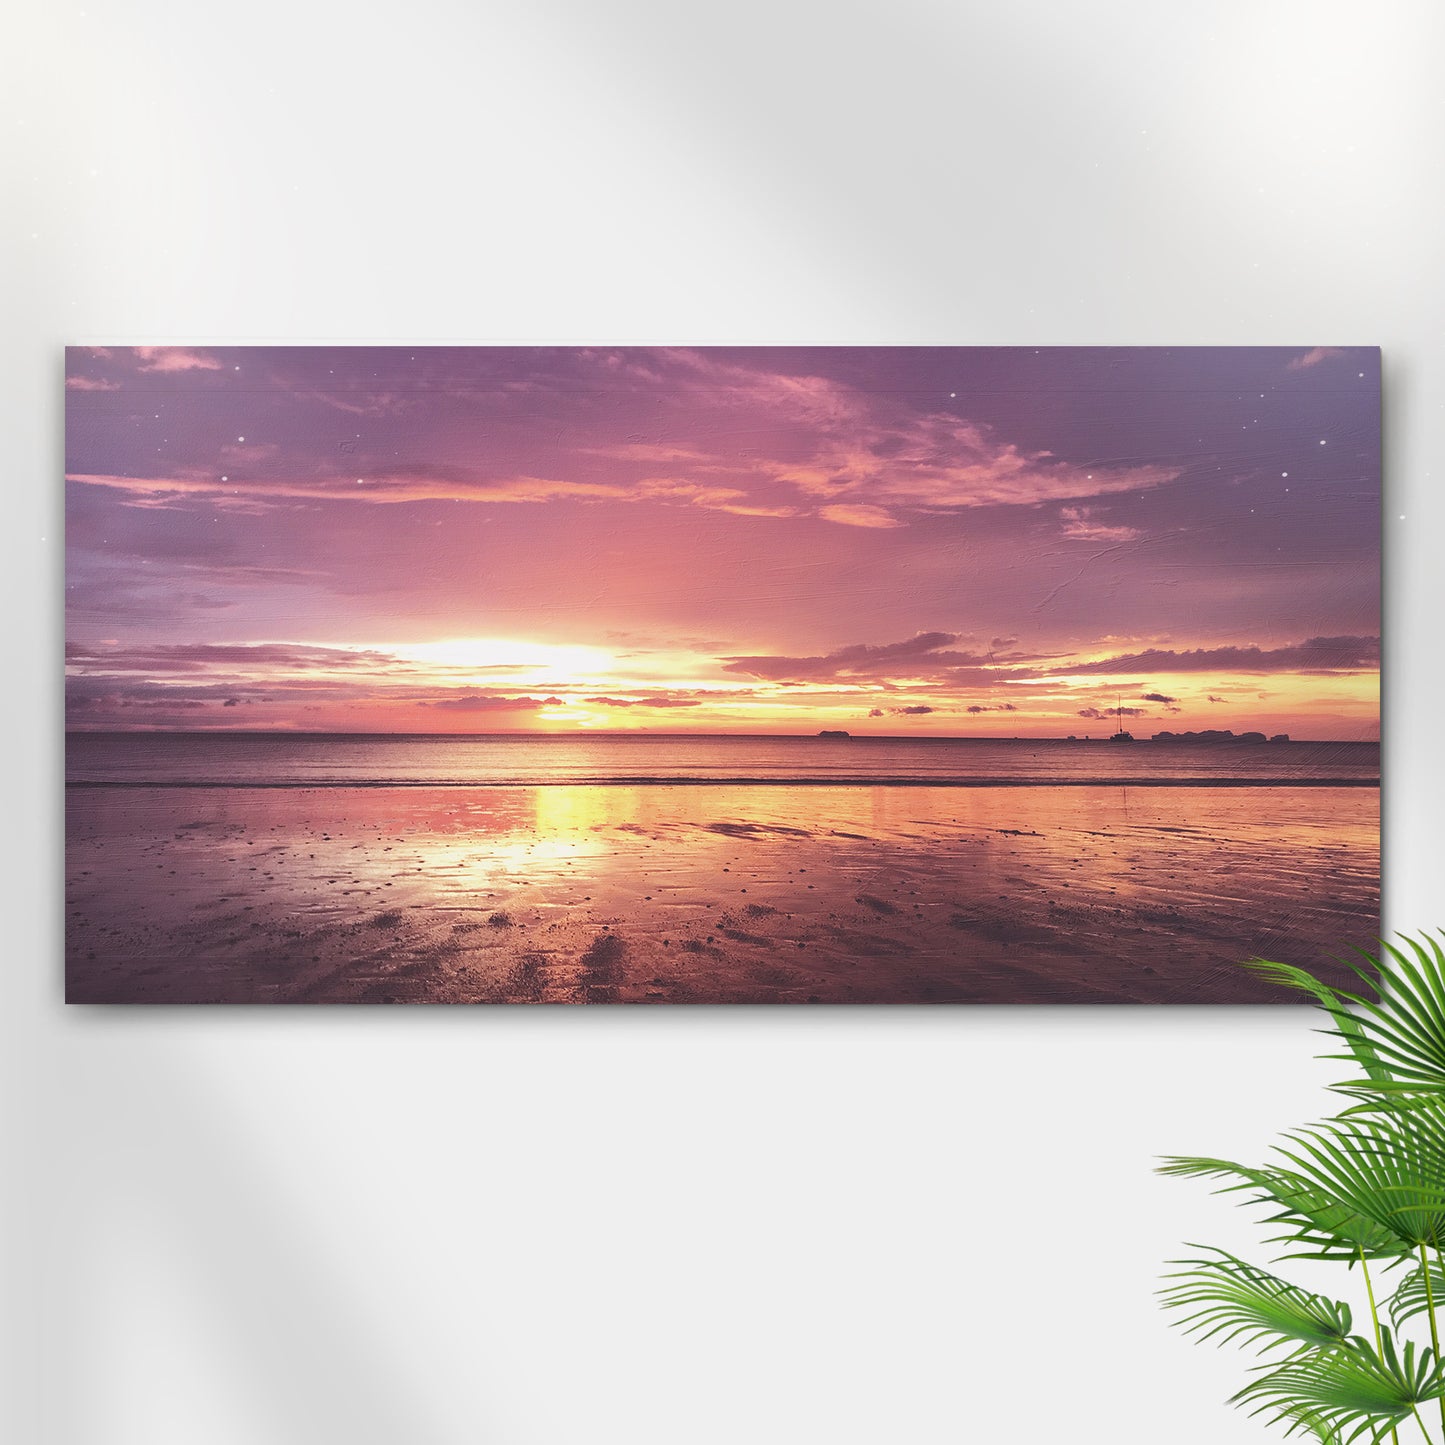 Sunset By The Beach Canvas Wall Art - Image by Tailored Canvases